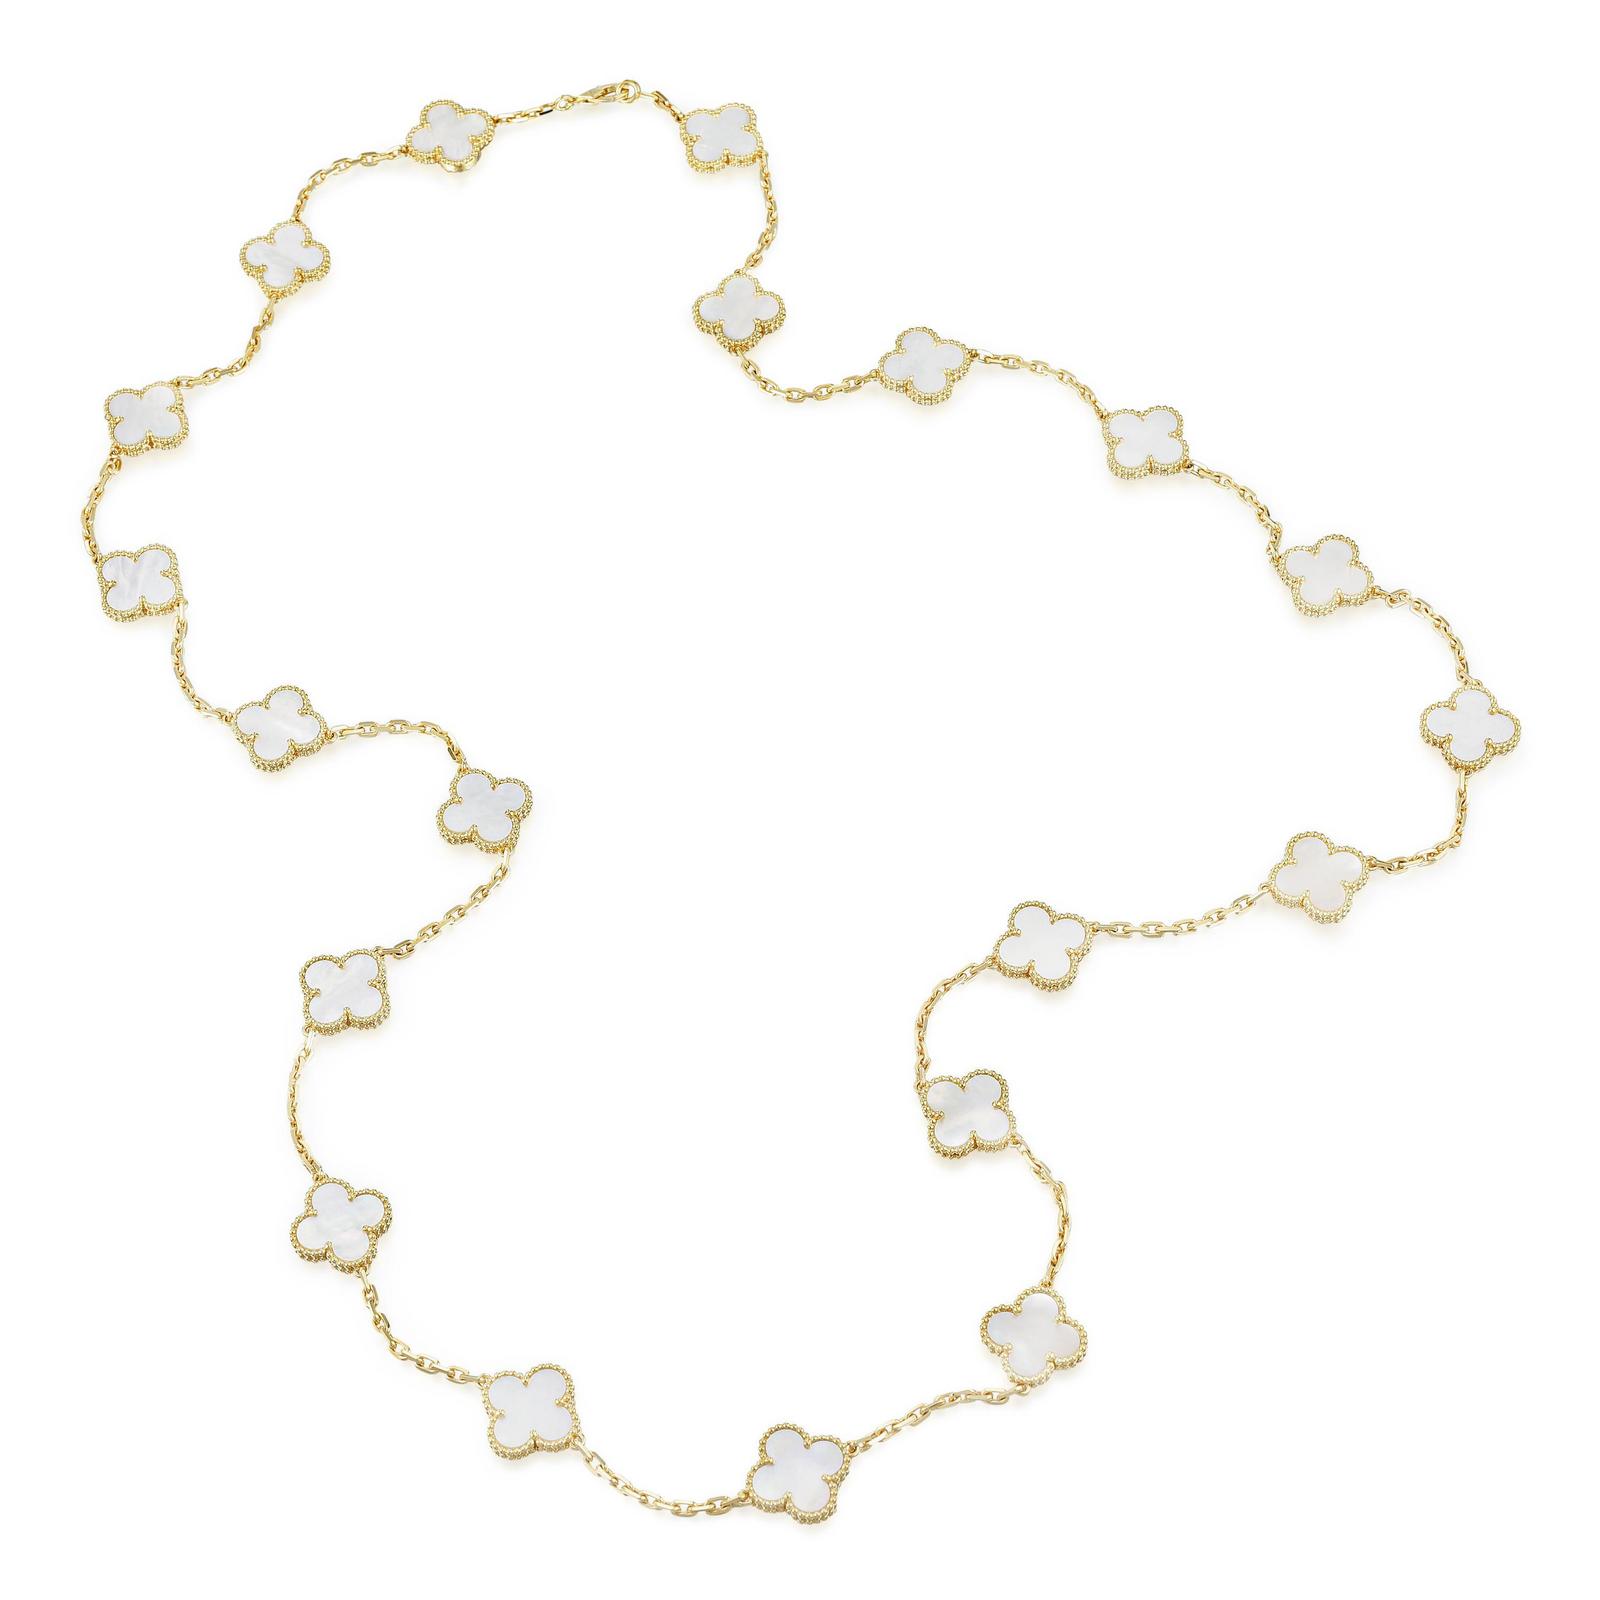 Gold and Mother-of-Pearl 'Vintage Alhambra' Necklace, France